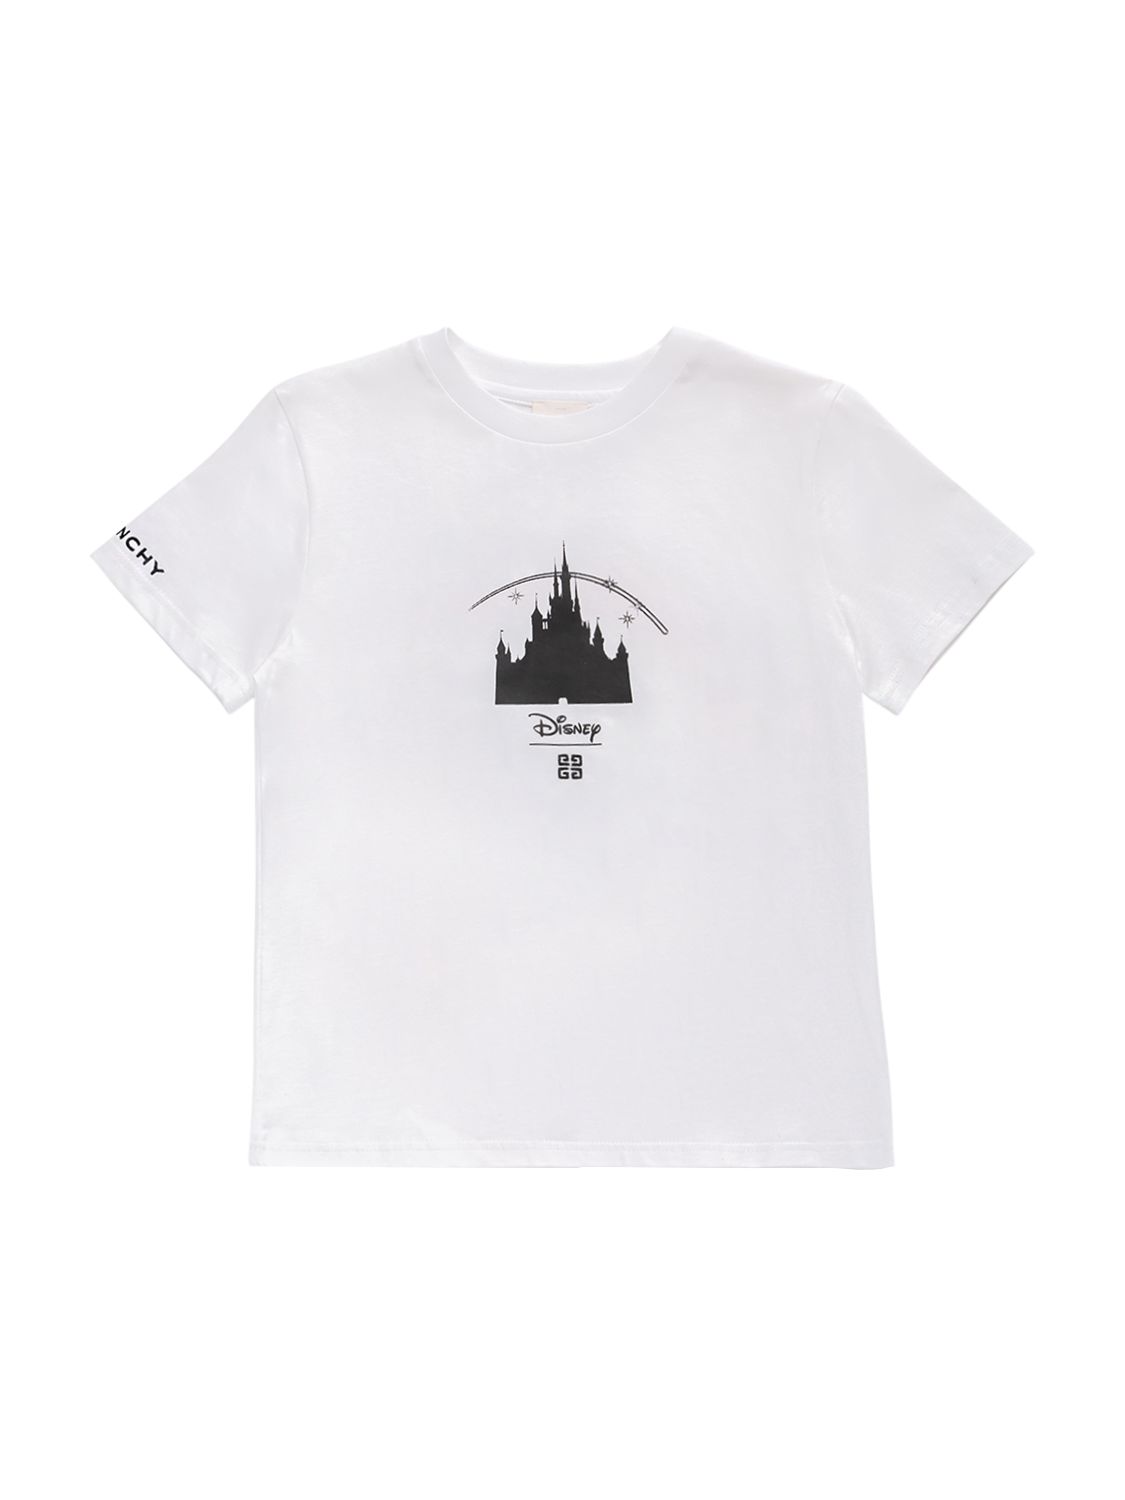 Givenchy Disney Printed Organic Cotton T-shirt In White